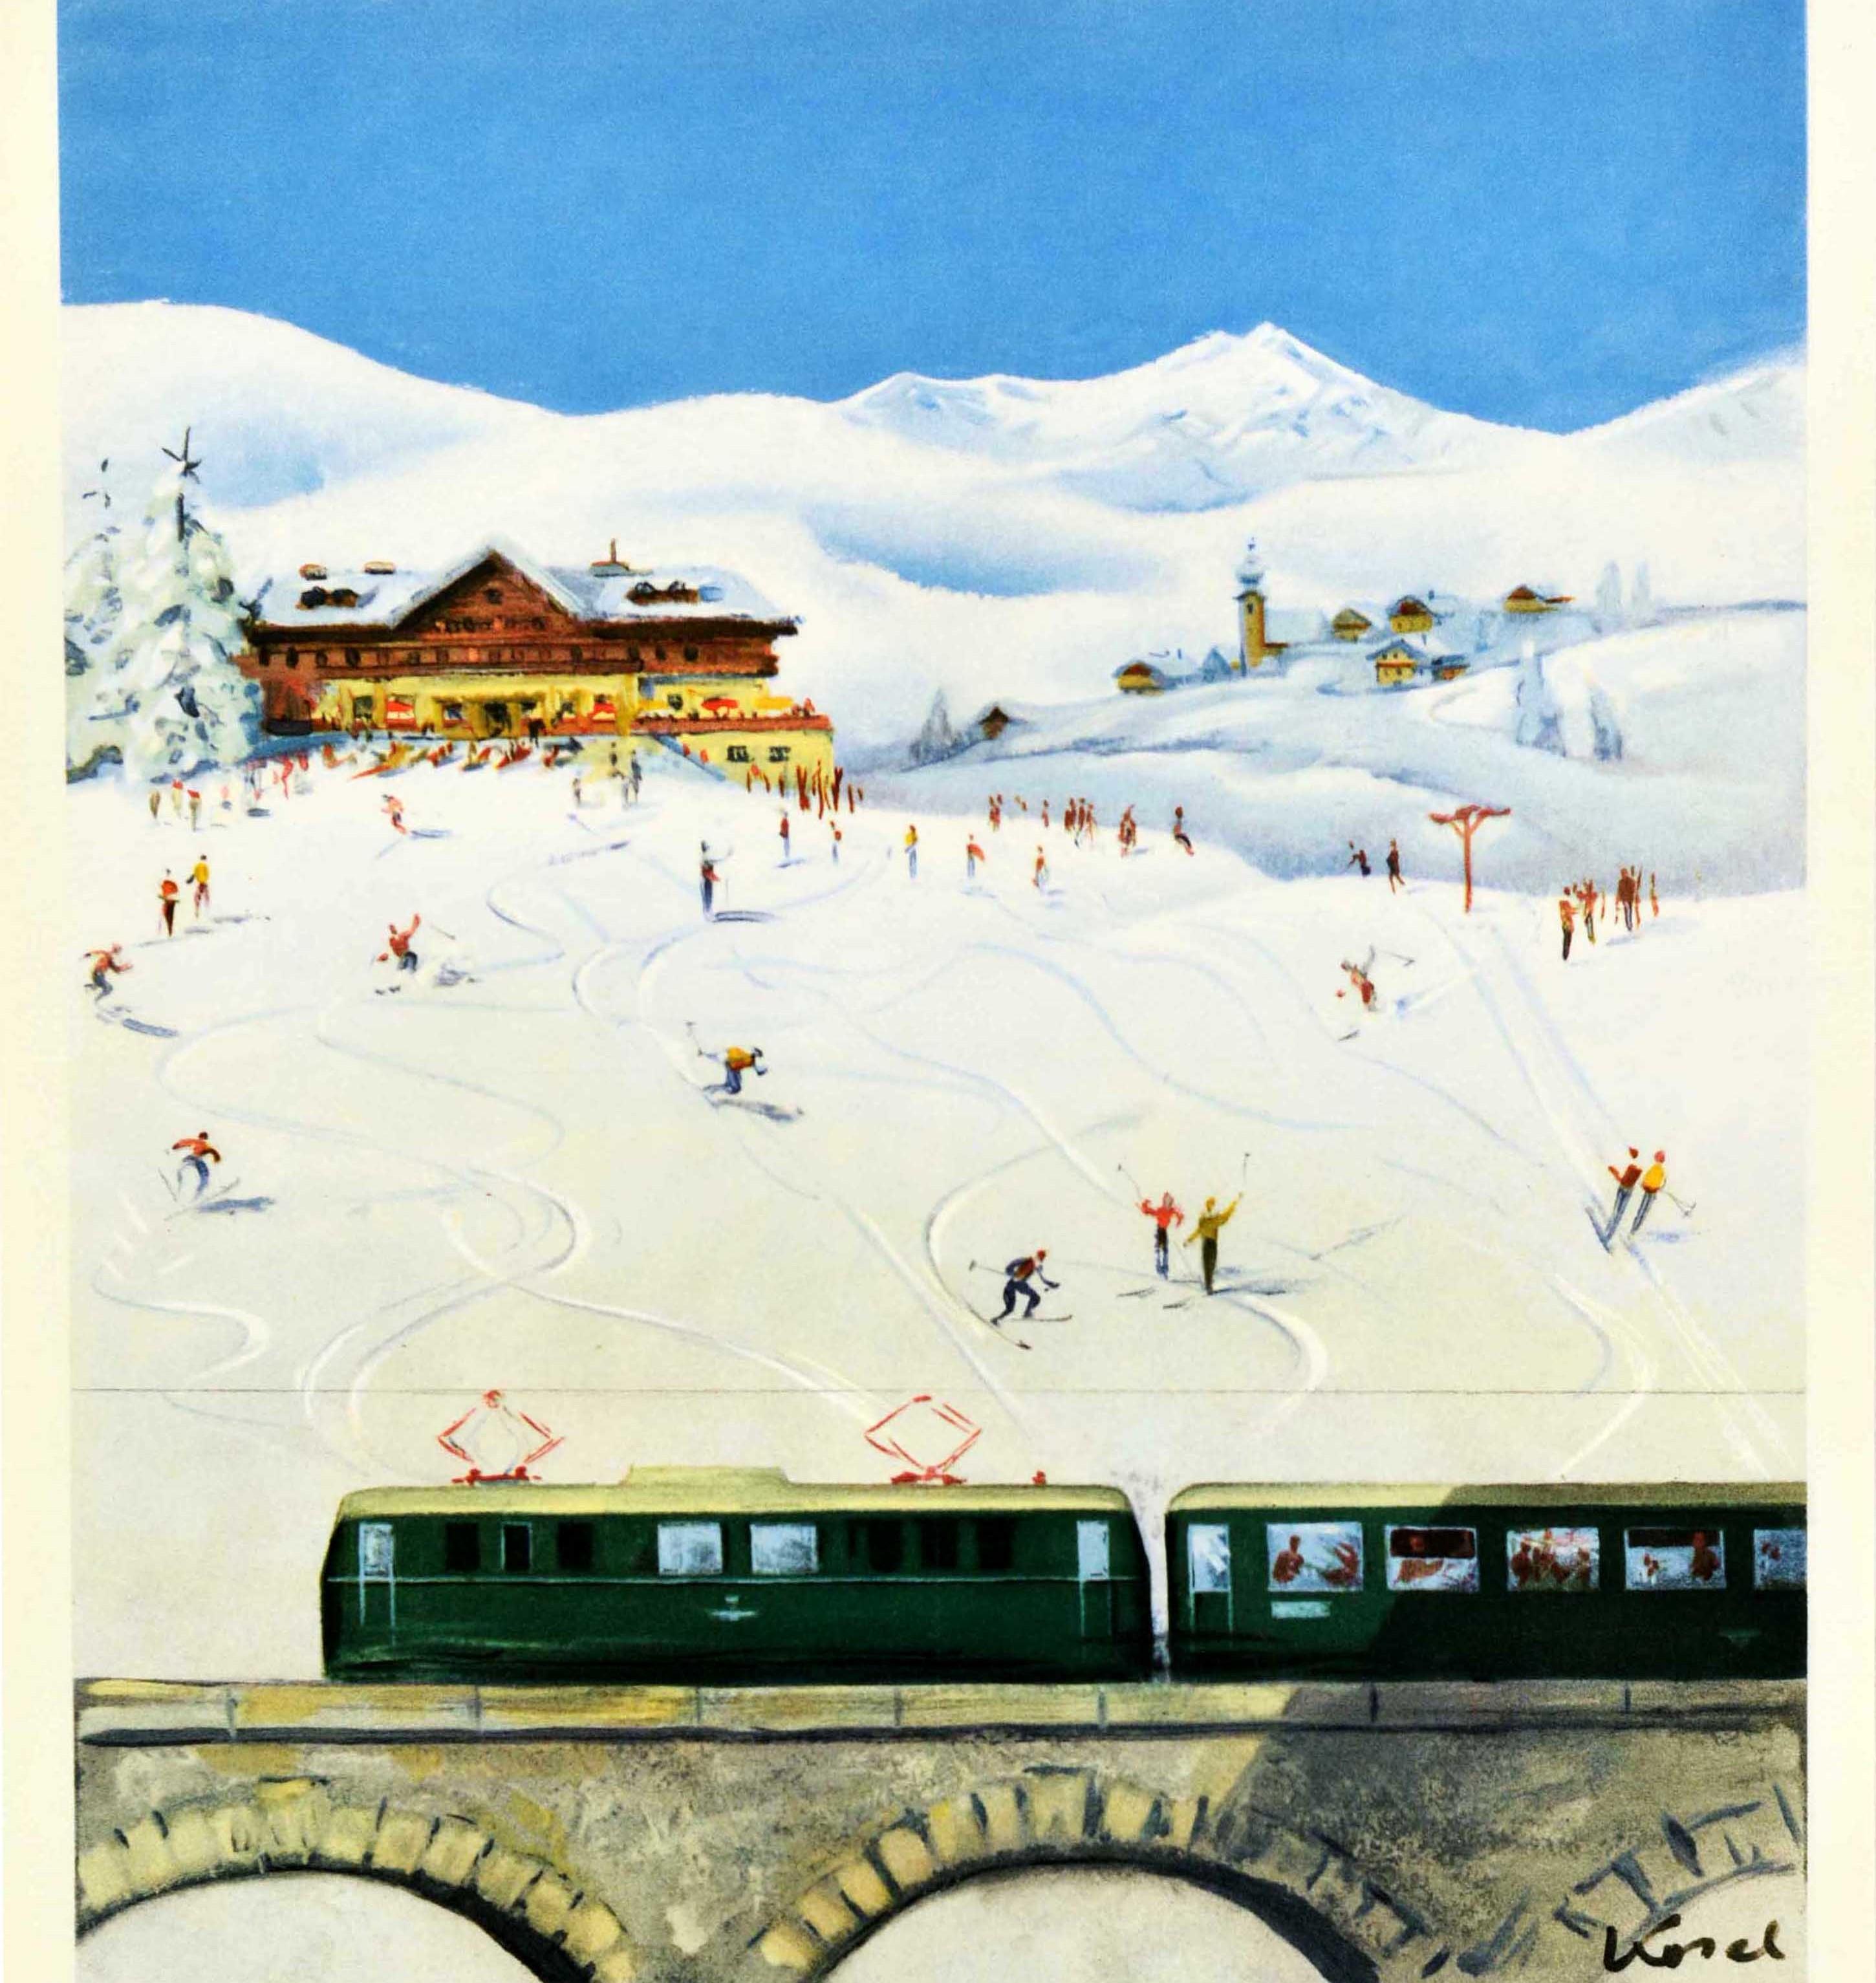 Original vintage winter sport and ski travel poster - Autriche OBB Chemins de Fer Federaux Autrichiens / Austria OBB Austrian Federal Railways - featuring skiers on a snowy hill skiing down and taking a drag lift up on the side in front of a snow